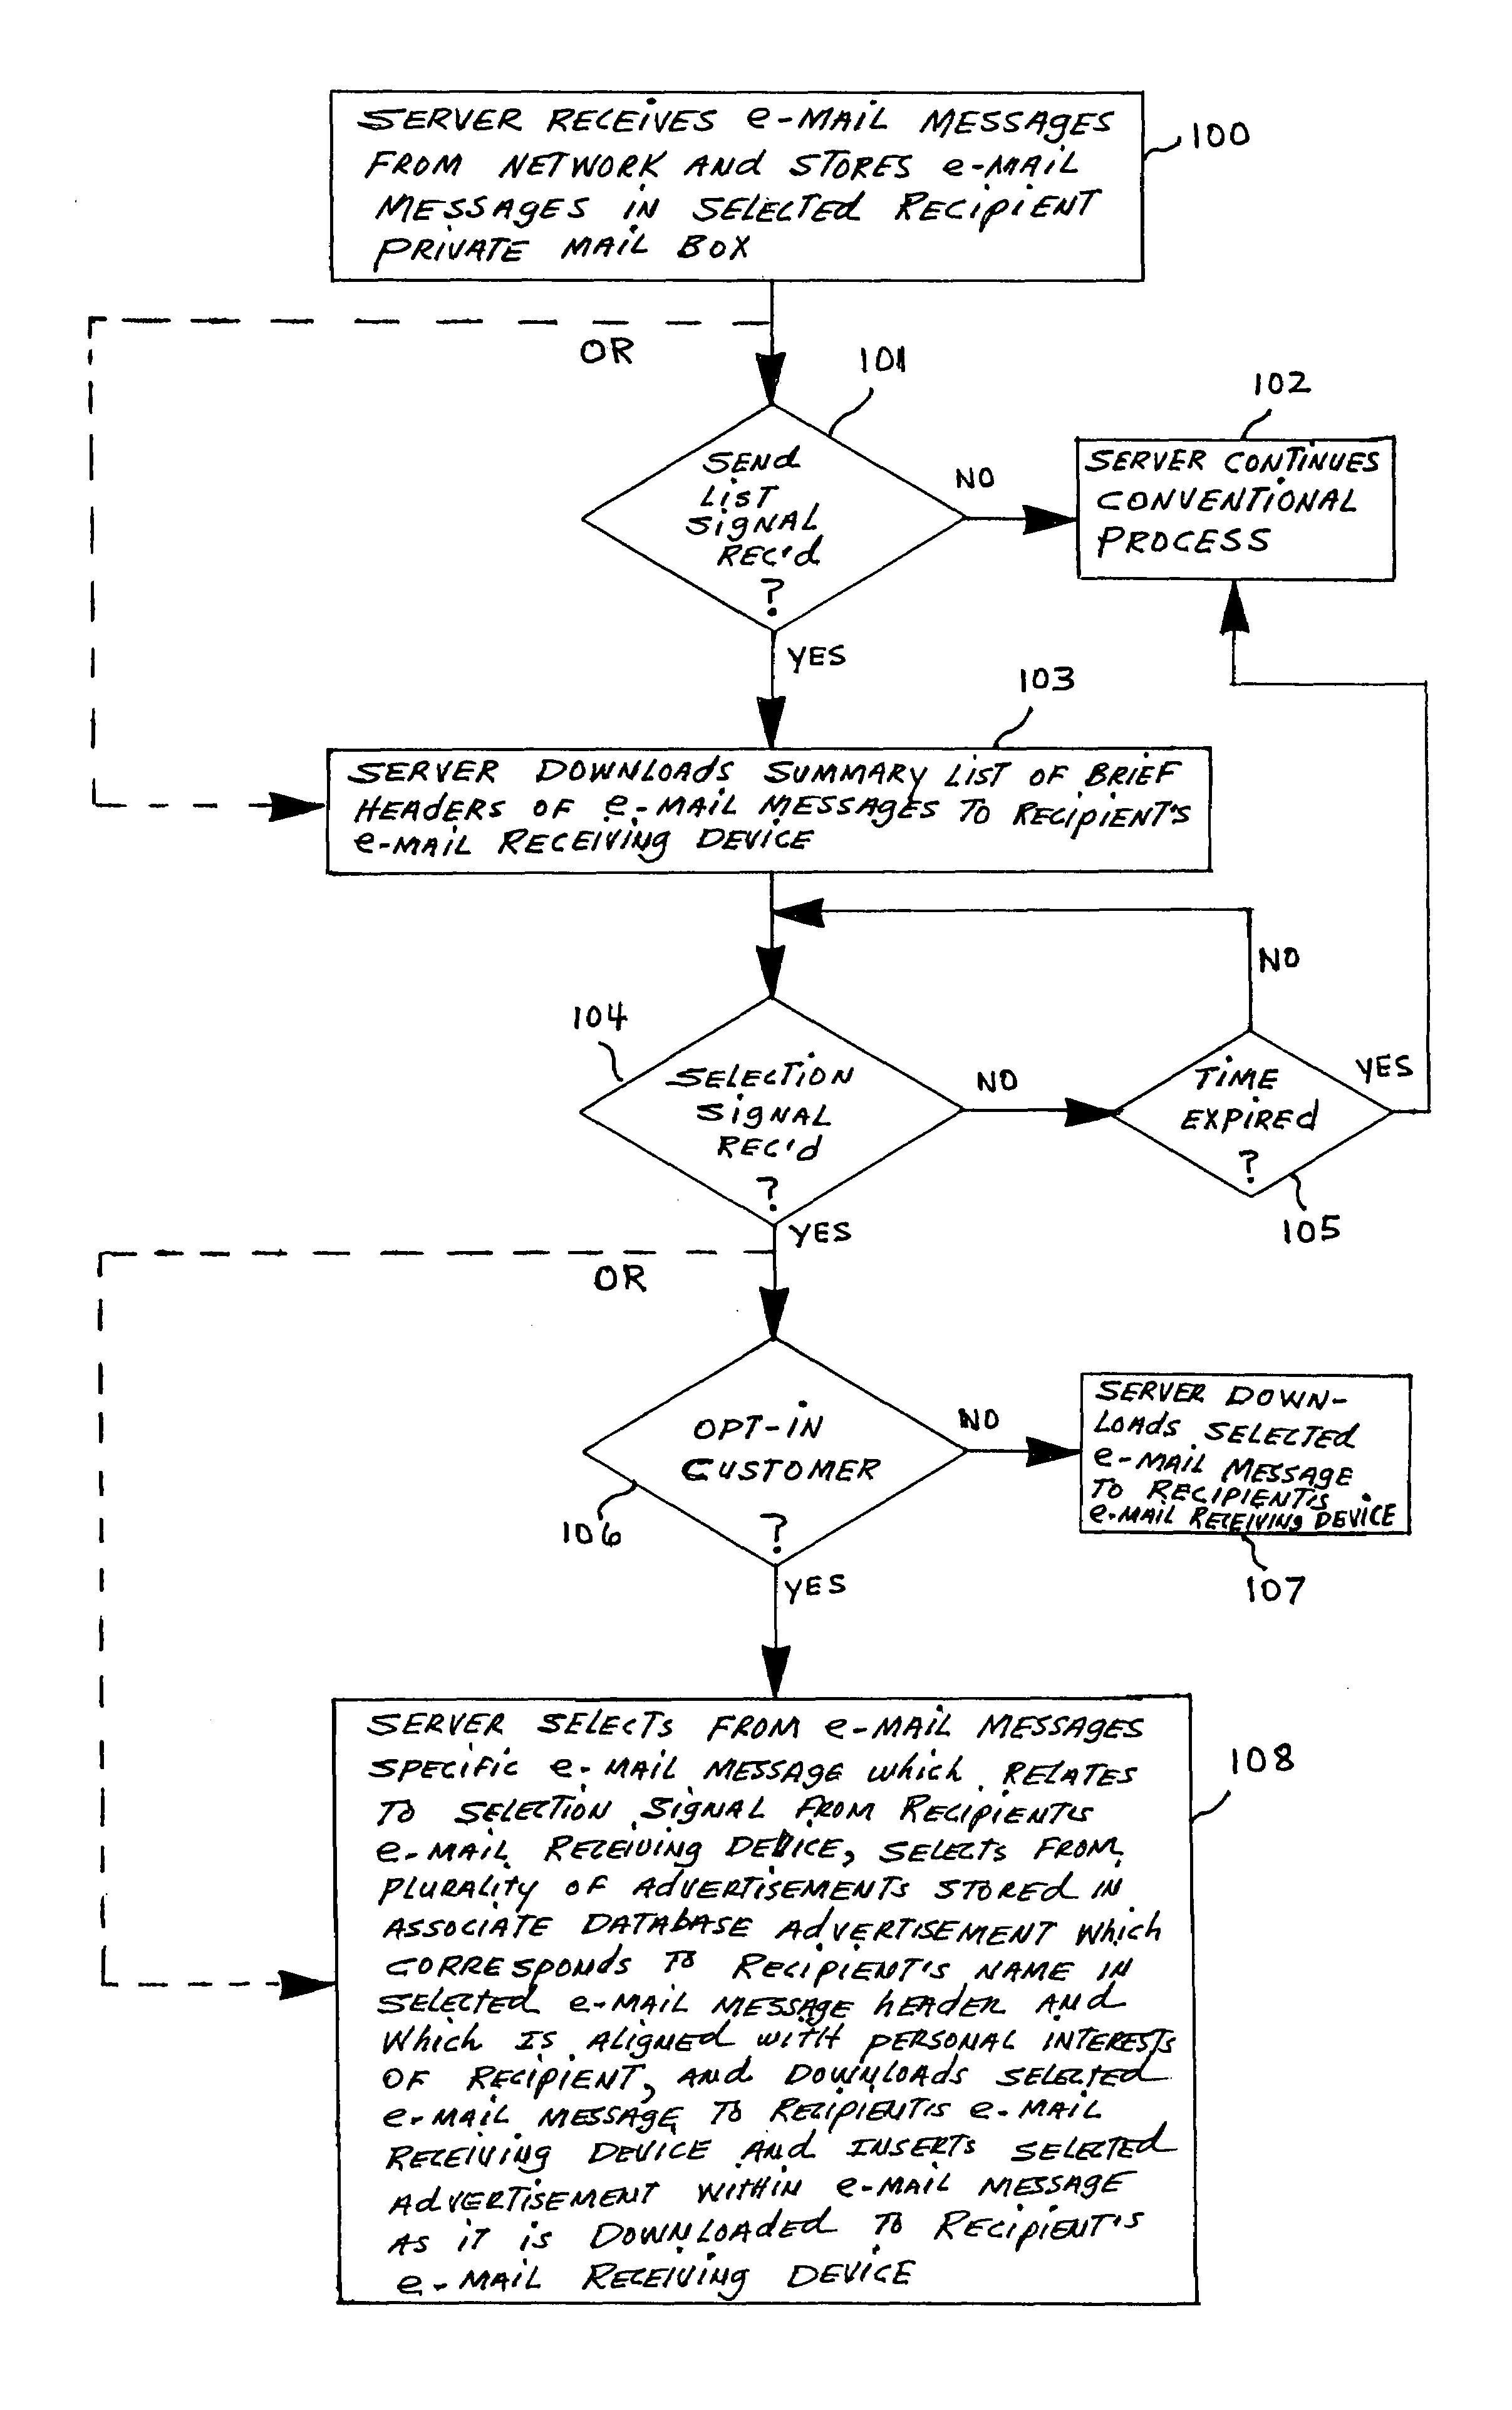 Enhanced electronic mail delivery system